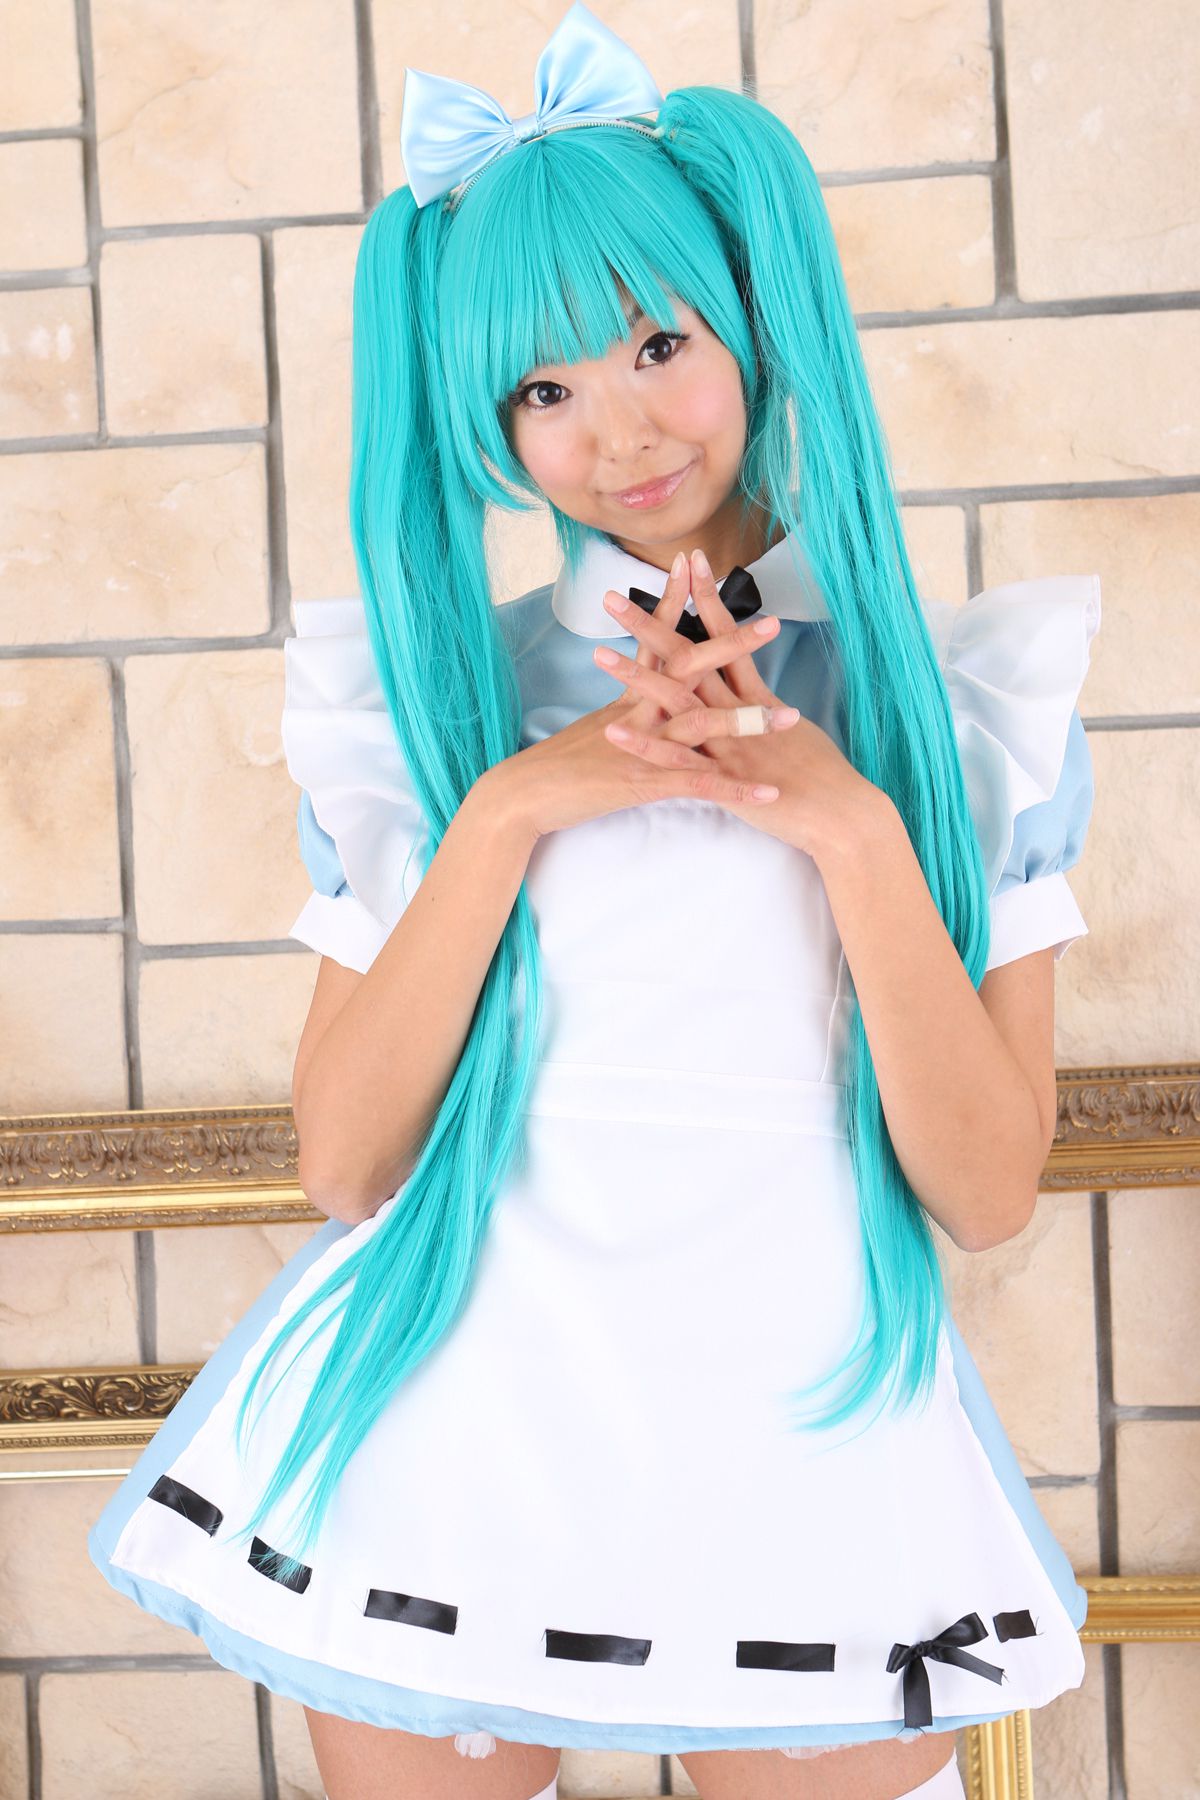 taotuhome[Cosplay套图] New Hatsune Miku from Vocaloid - So Sexy第63张